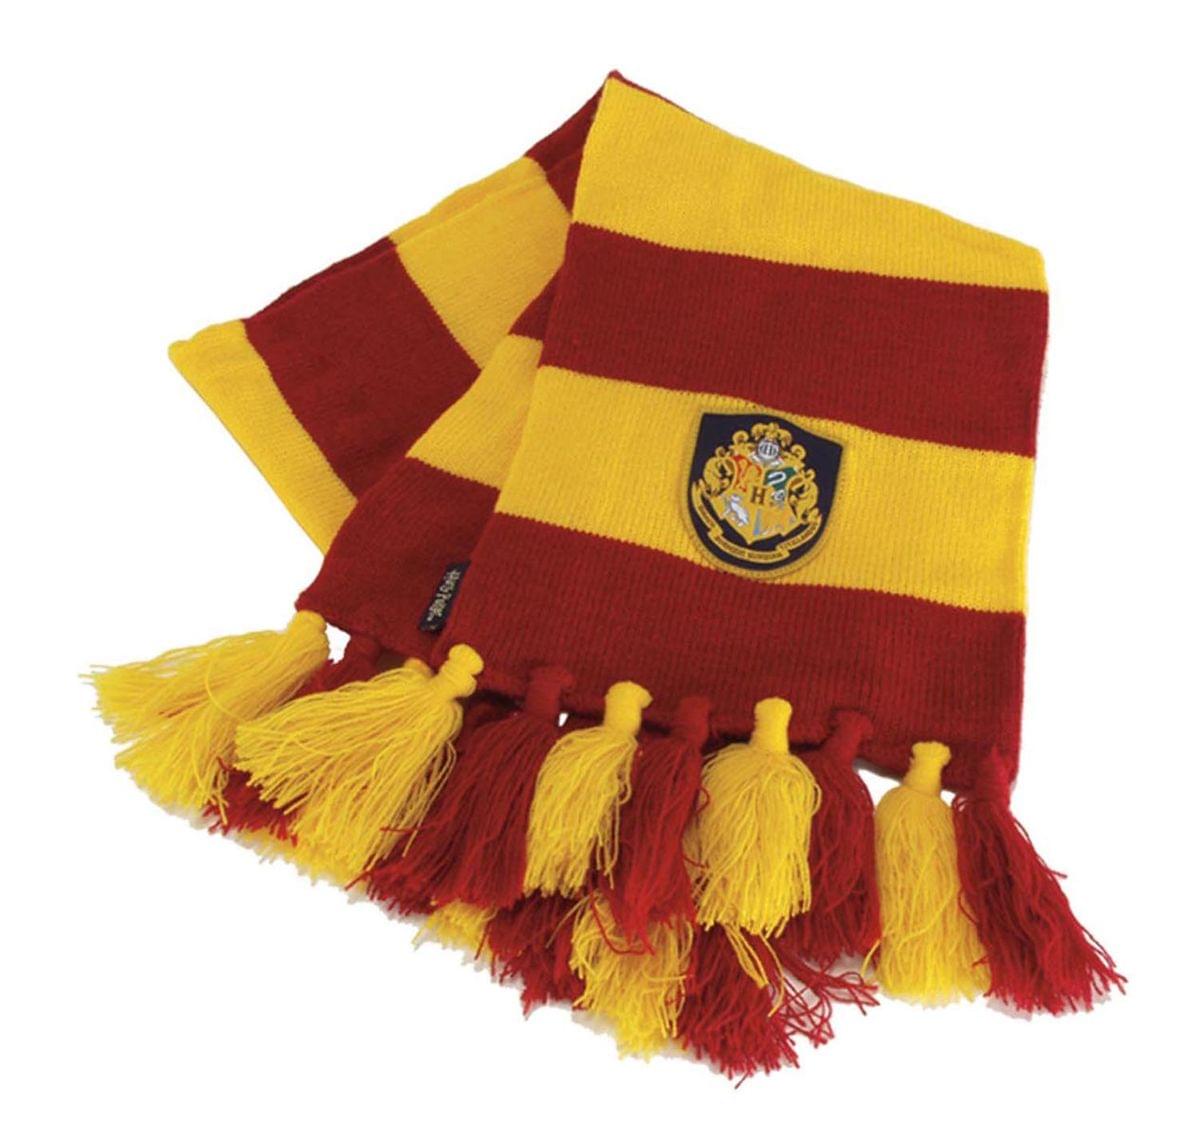 Harry Potter Hogwarts Maroon & Yellow Knit Scarf Costume Accessory